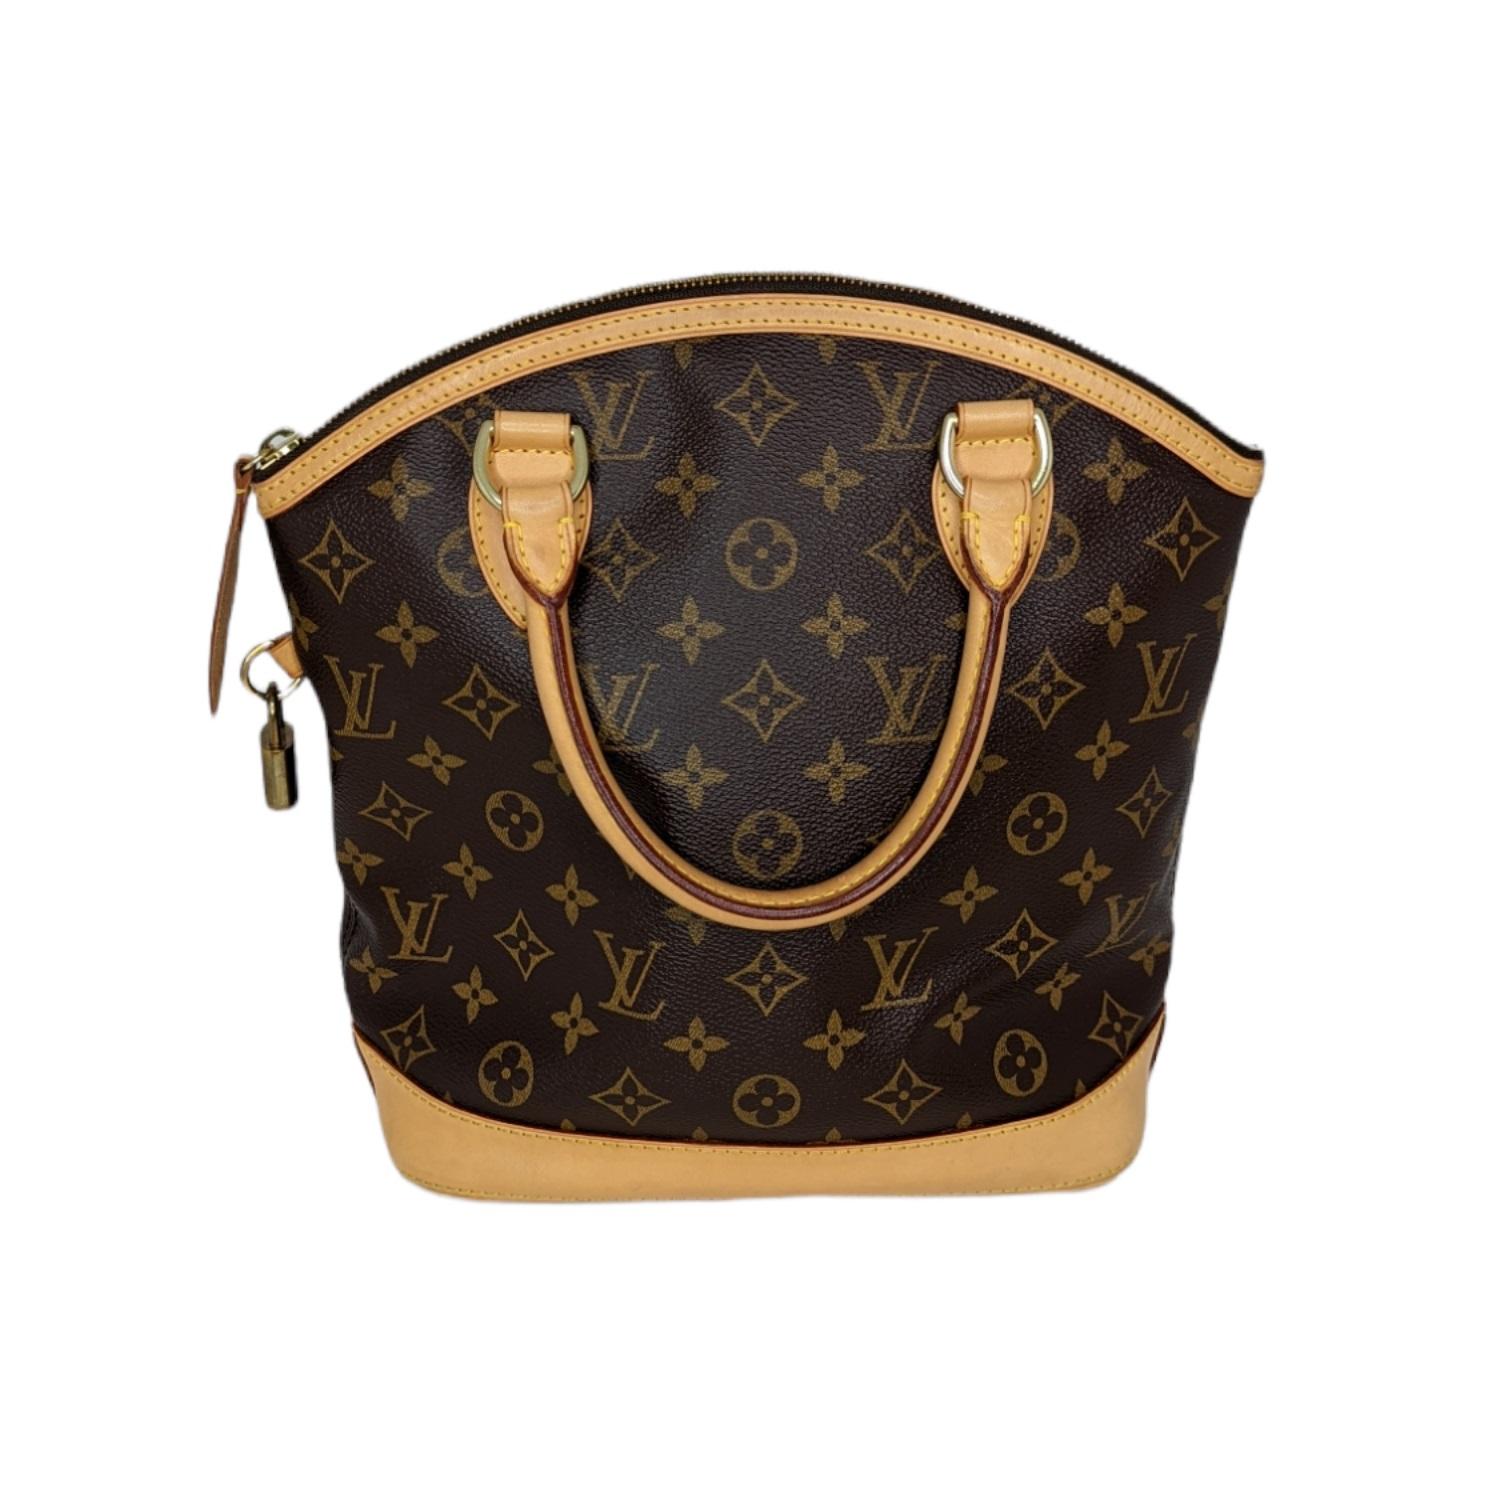 This elegant looking Louis Vuitton Monogram Canvas Vertical Lockit Bag is the tallest of the Lockit collection. It has an ultra-spacious and deep interior with a zip top that secures all your belongings. Now discontinued, this piece is highly sought